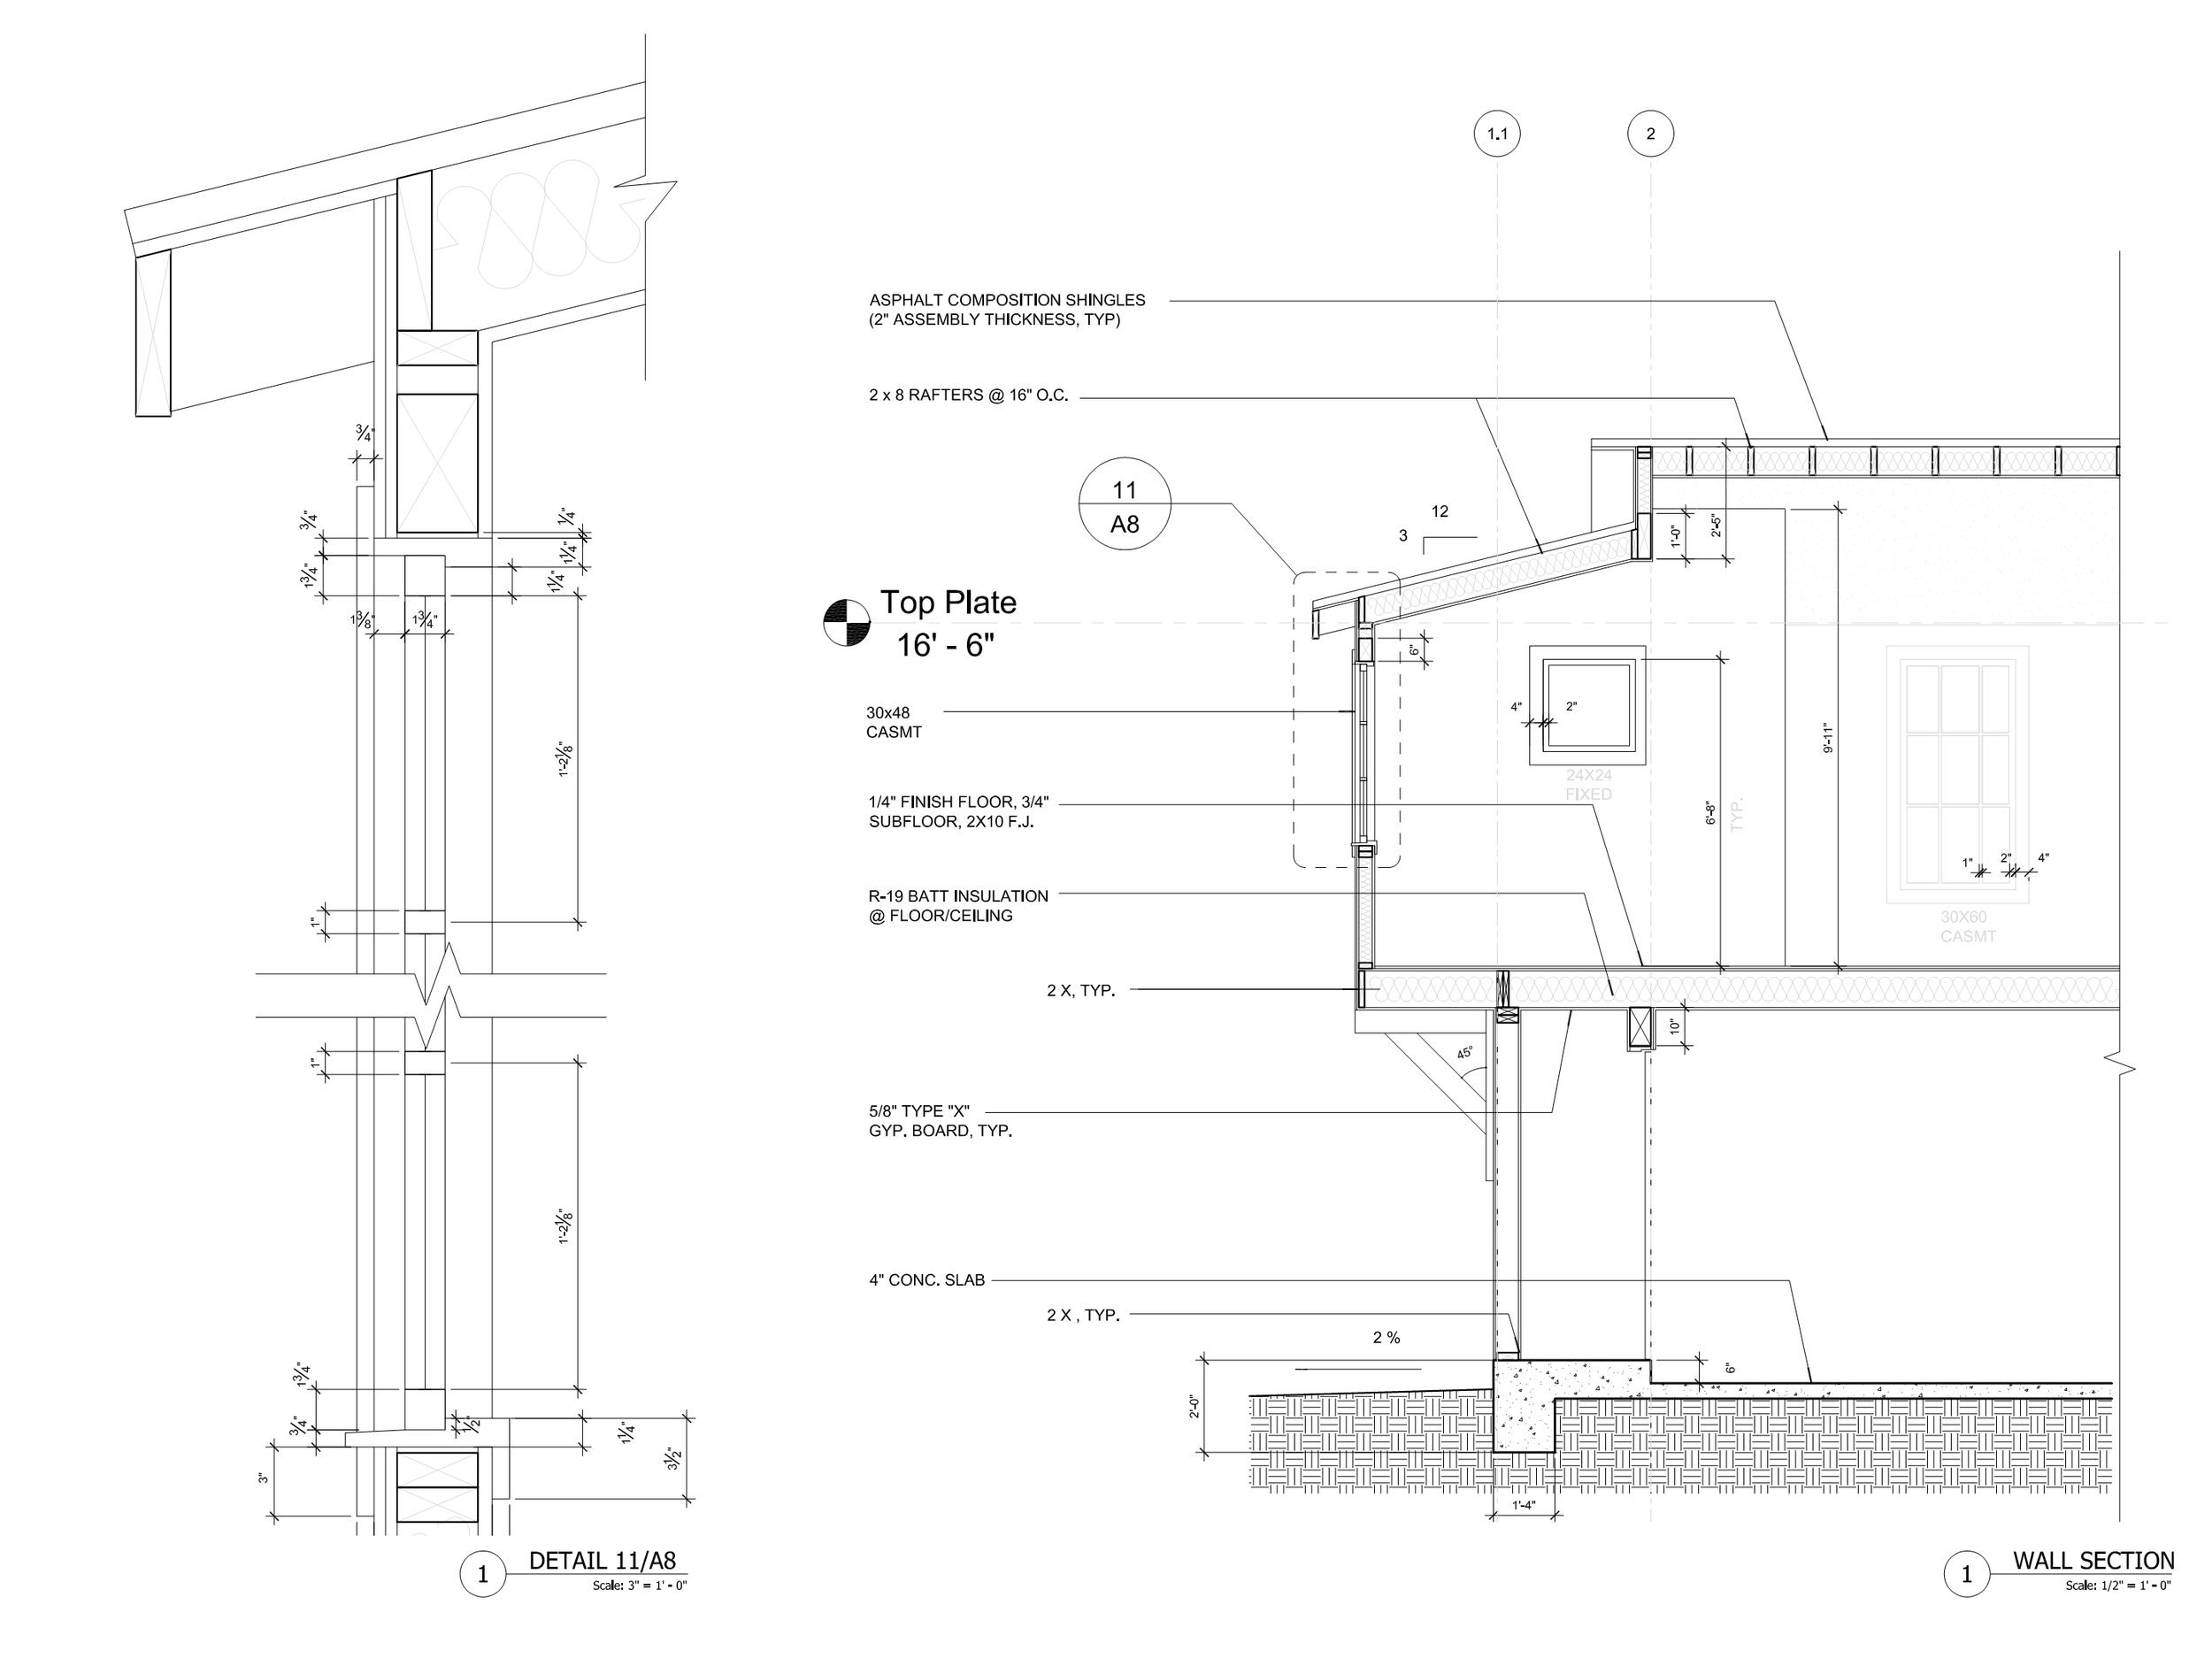 Drawing 4_Wall Section Revised 2011_1116 A7.png